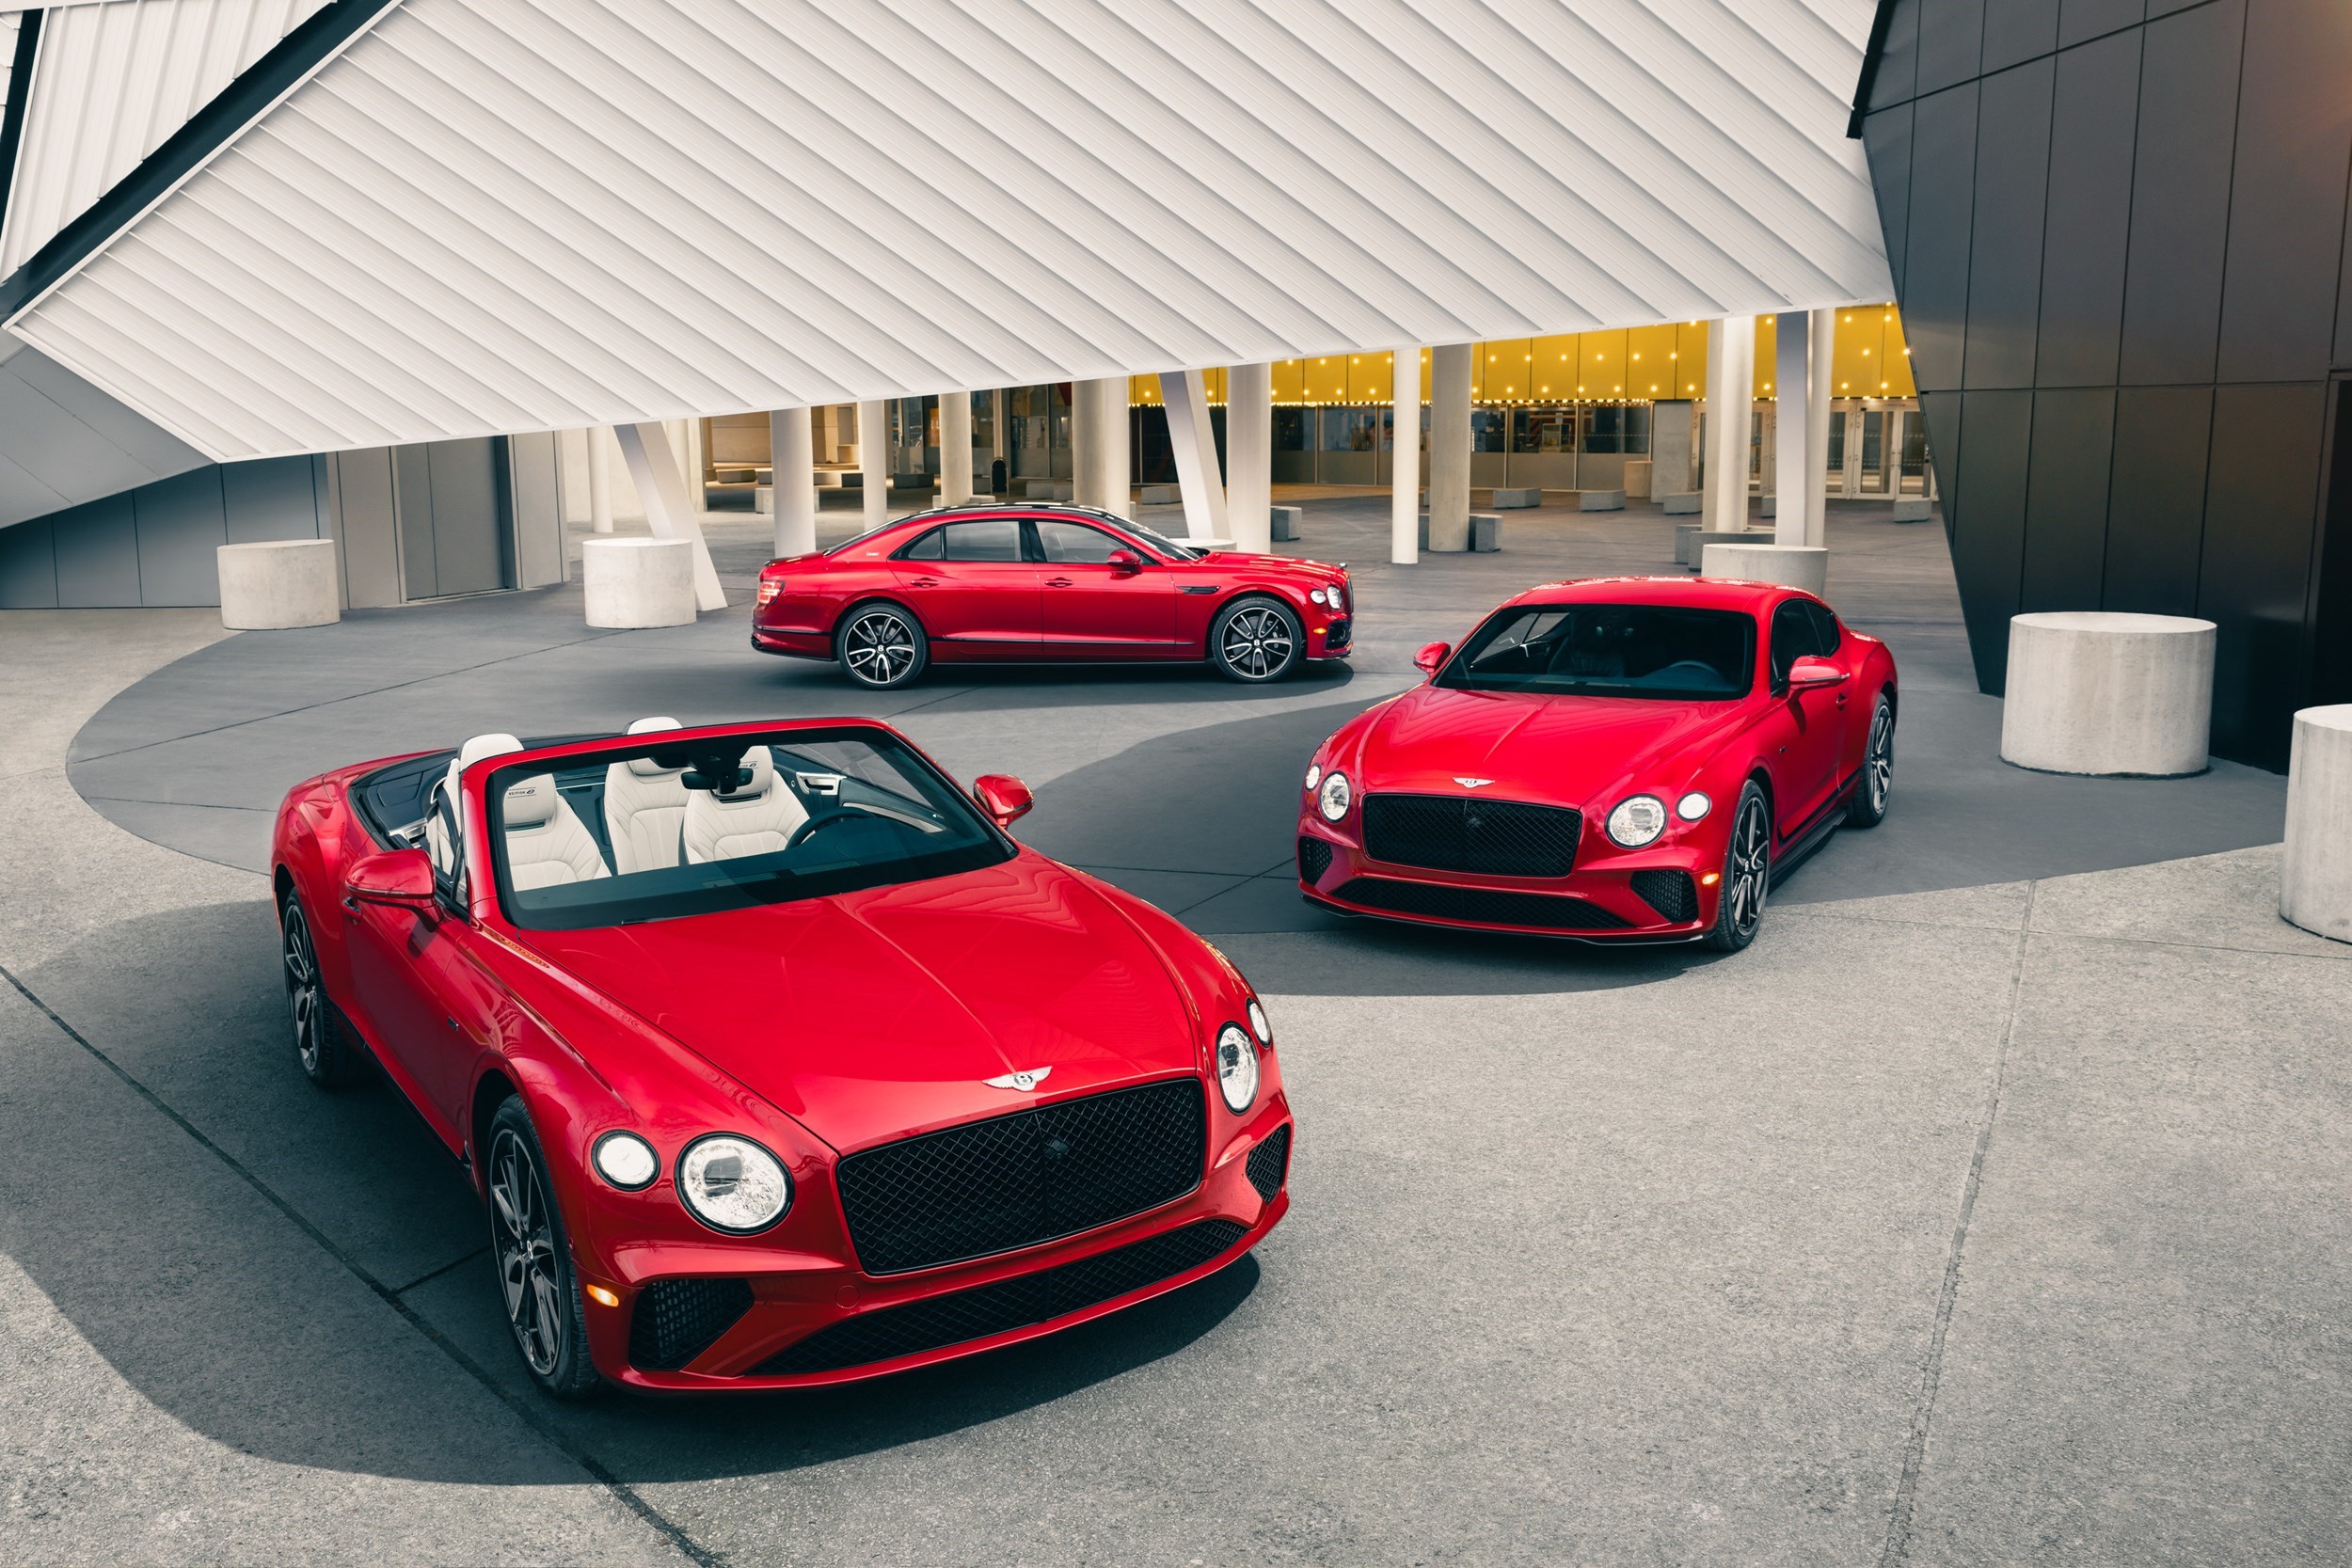 Colour , Rojo Image type , Estática Angle , Perfil Lateral Angle , Tres Cuartos Frontal Angle , Frontal General , Bentley Mulliner V8 Current Models , Flying Spur , Flying Spur Current Models , Continental GT Convertible , Continental GT Convertible Current Models , Continental GT , Continental GT 